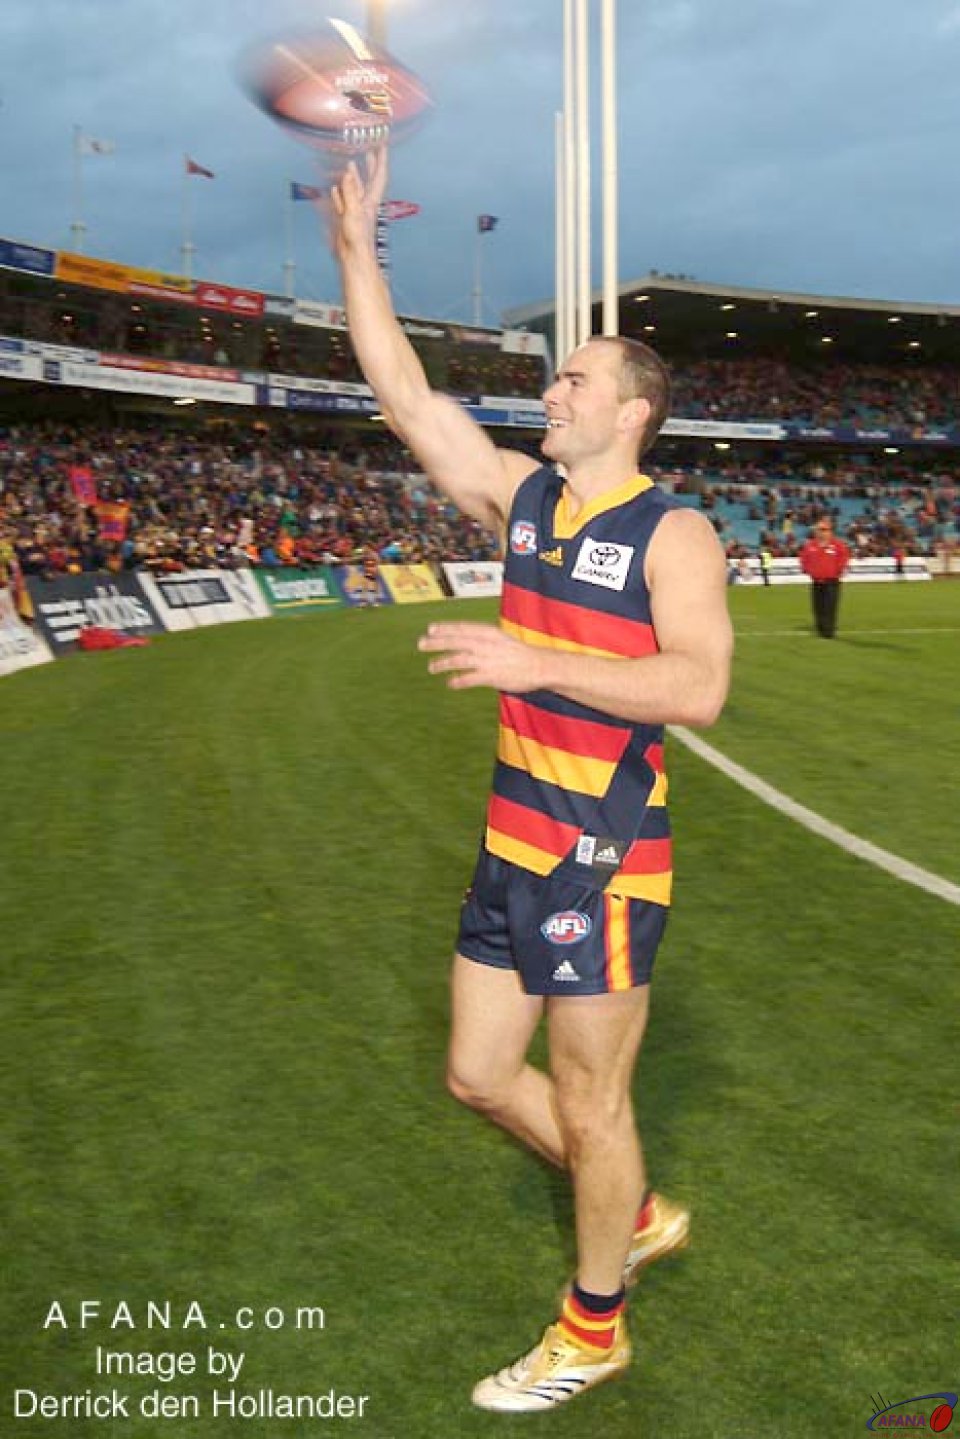 [b]Jason Torney illegally passes a souvenir ball to a member in the crowd after Adelaide's win[/b]